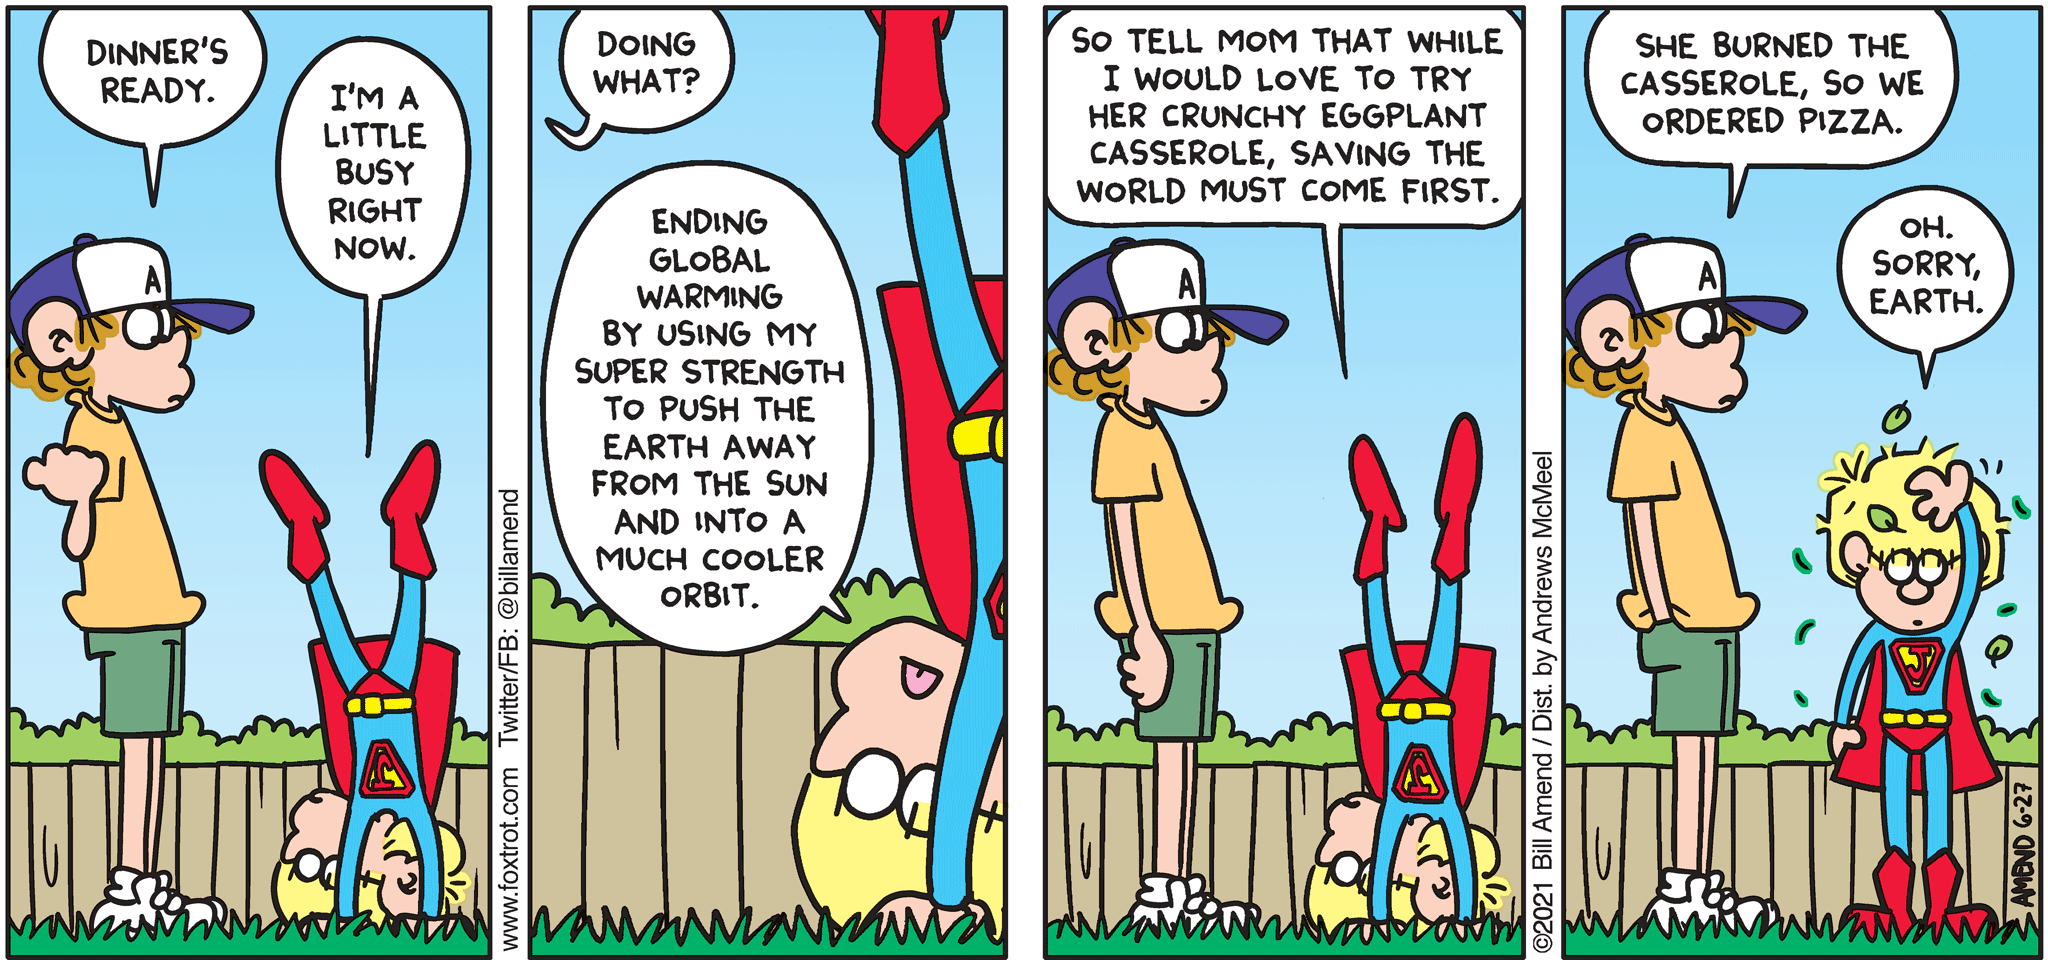 FoxTrot comic strip by Bill Amend - "Super Priorities" published June 27, 2021 - Peter Fox: Dinner's ready. Jason Fox: I'm a little busy right now. Peter Fox: Doing what? Jason Fox: Ending Global Warming by using my super strength to push the earth away from the sun and into a much cooler orbit. So tell mom that while I would love to try her crunch eggplant casserole, saving the world must come first. Peter Fox: She burned the casserole, so we ordered pizza. Jason Fox: Oh. Sorry, Earth. 